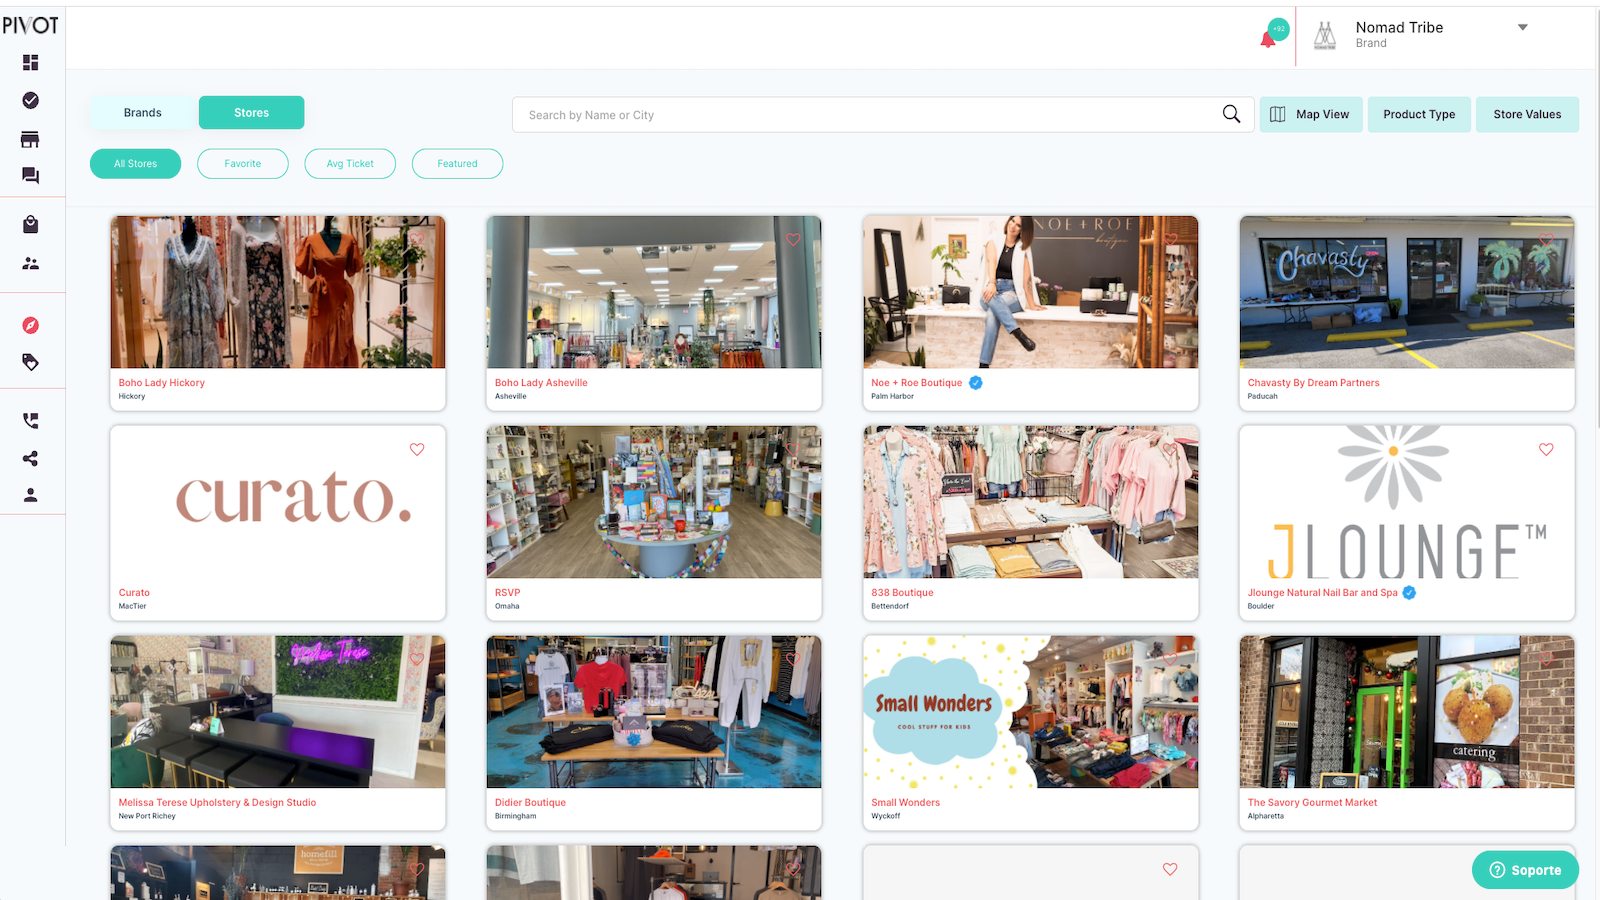 Discover stores as easily in Pivot